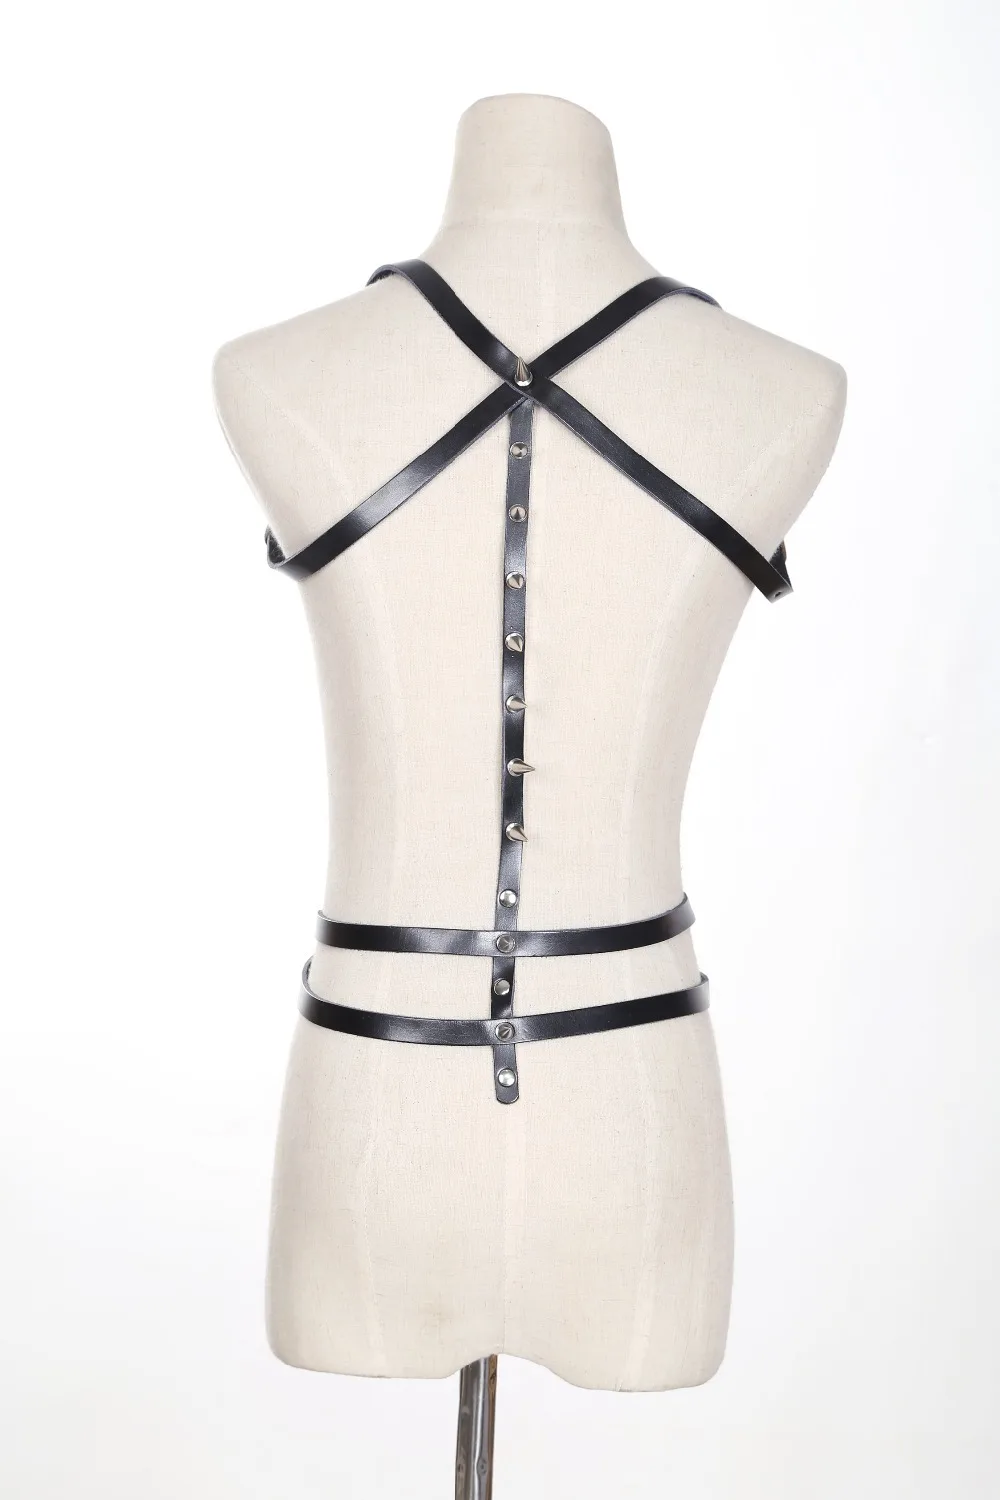 Harness. Ribey from neck to wait sexy garter leather harness great for ...